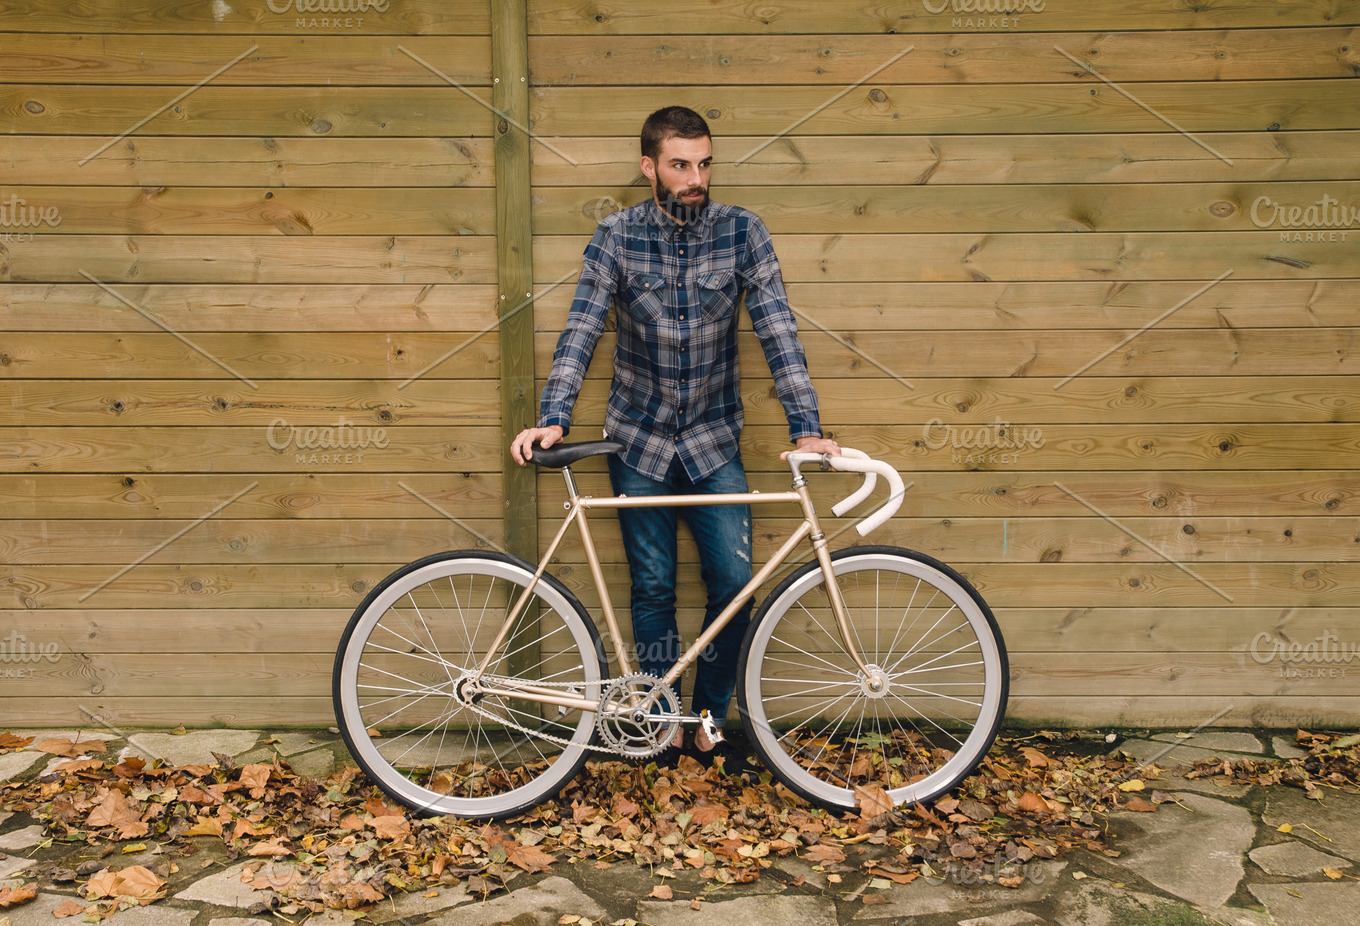 Hipster Man With His Fixie Bike ~ People Photos ~ Creative Market 